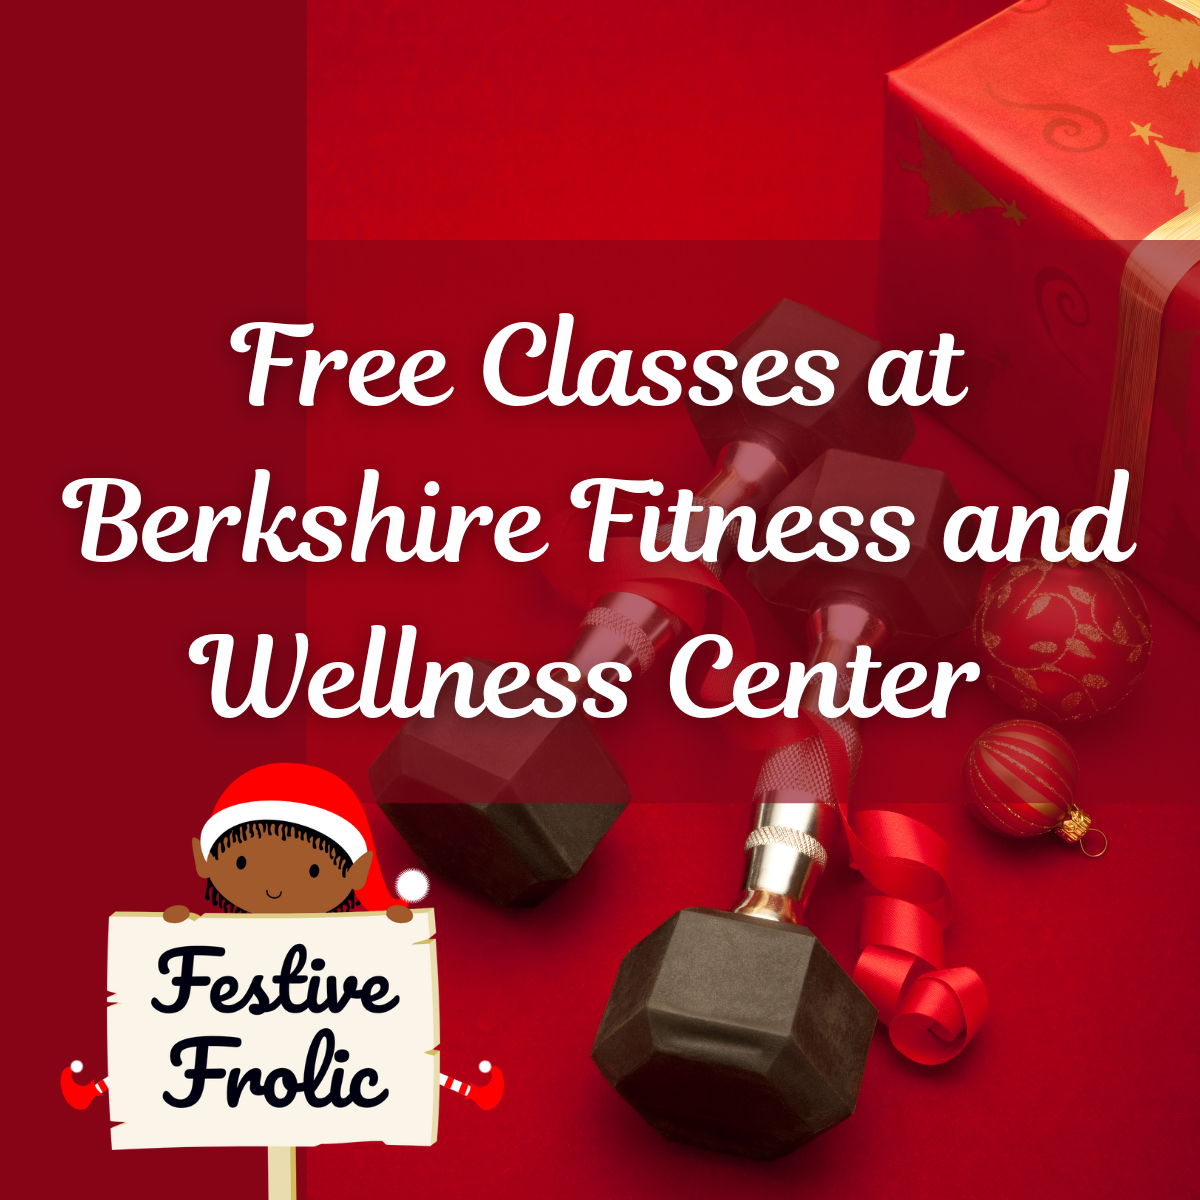 Free Classes at Berkshire Fitness and Wellness Center